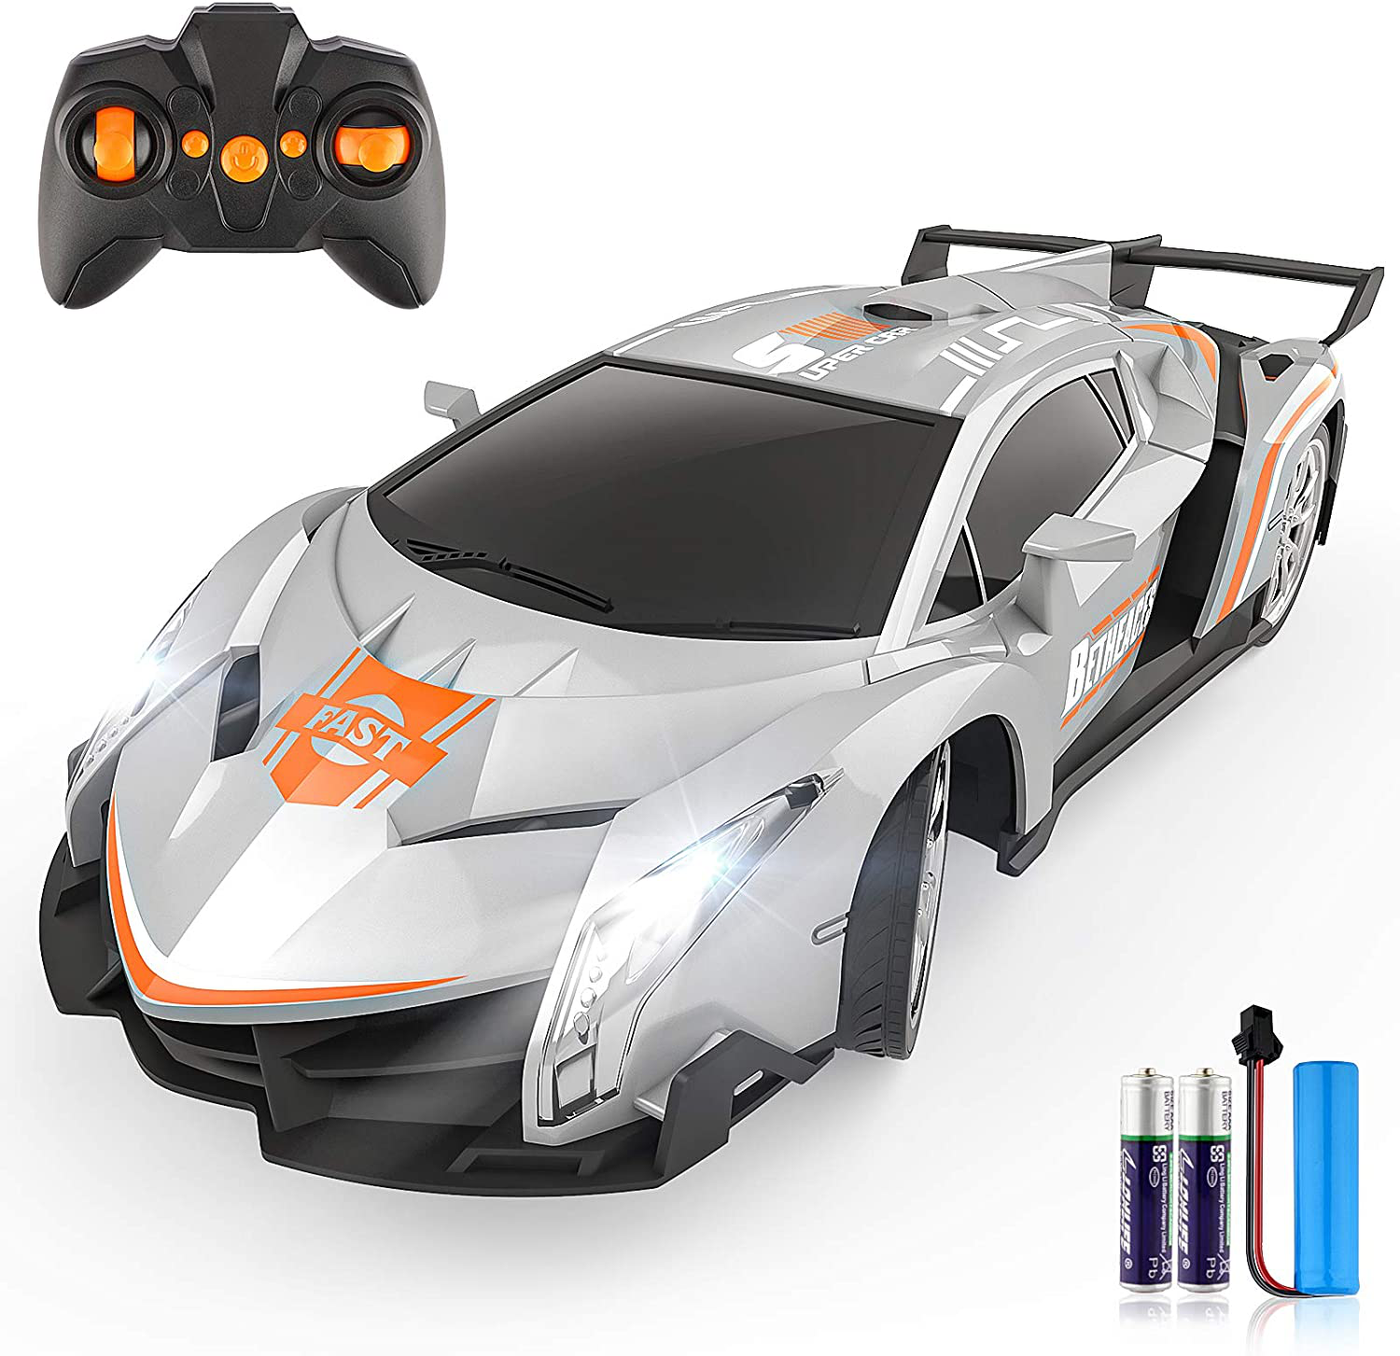 Growsland Remote Control Car RC Cars Xmas Gifts Toys for Kids 1/18 Electric Sport Racing Hobby Rc Crawler Toy Car Model Vehicle for Boys Girls Adults Included Rechargable Batteries (Silver)